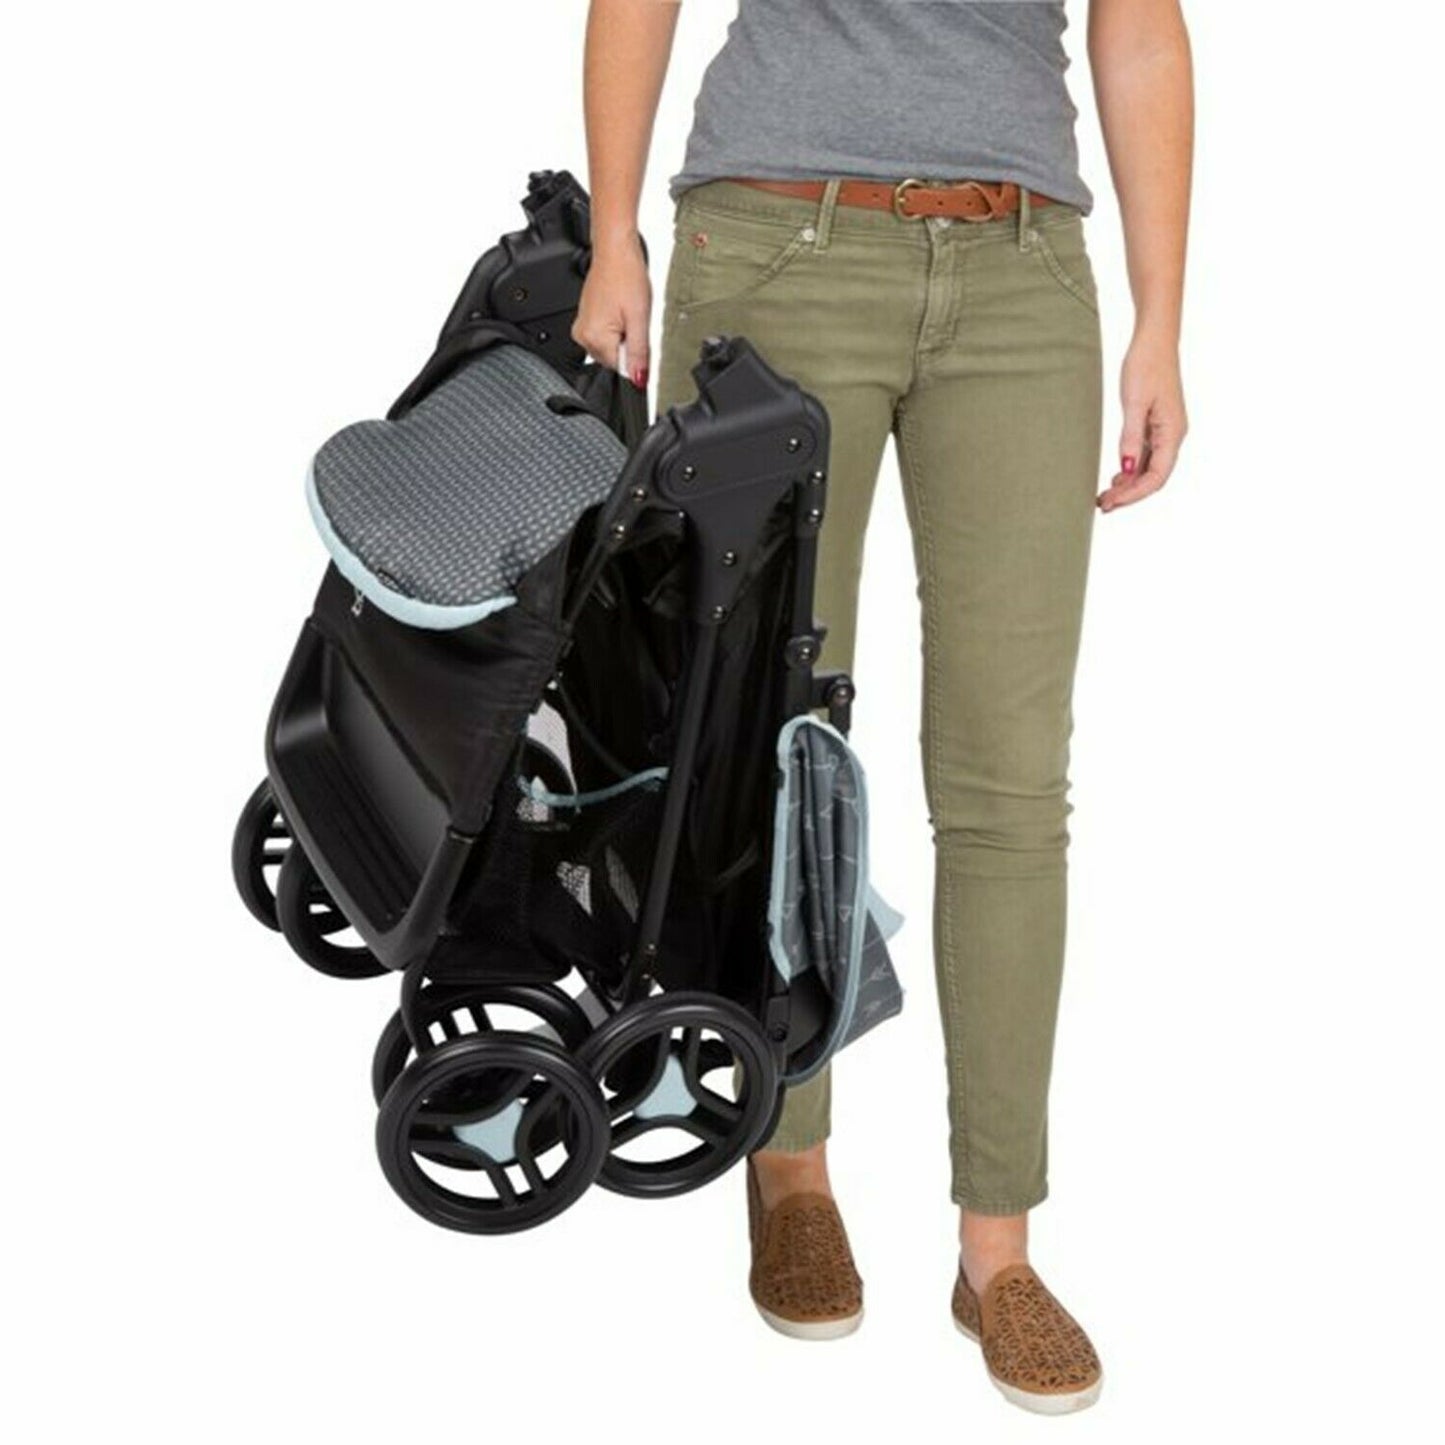 Lightweight Baby Stroller with Car Seat Travel System Playard Nursery Combo